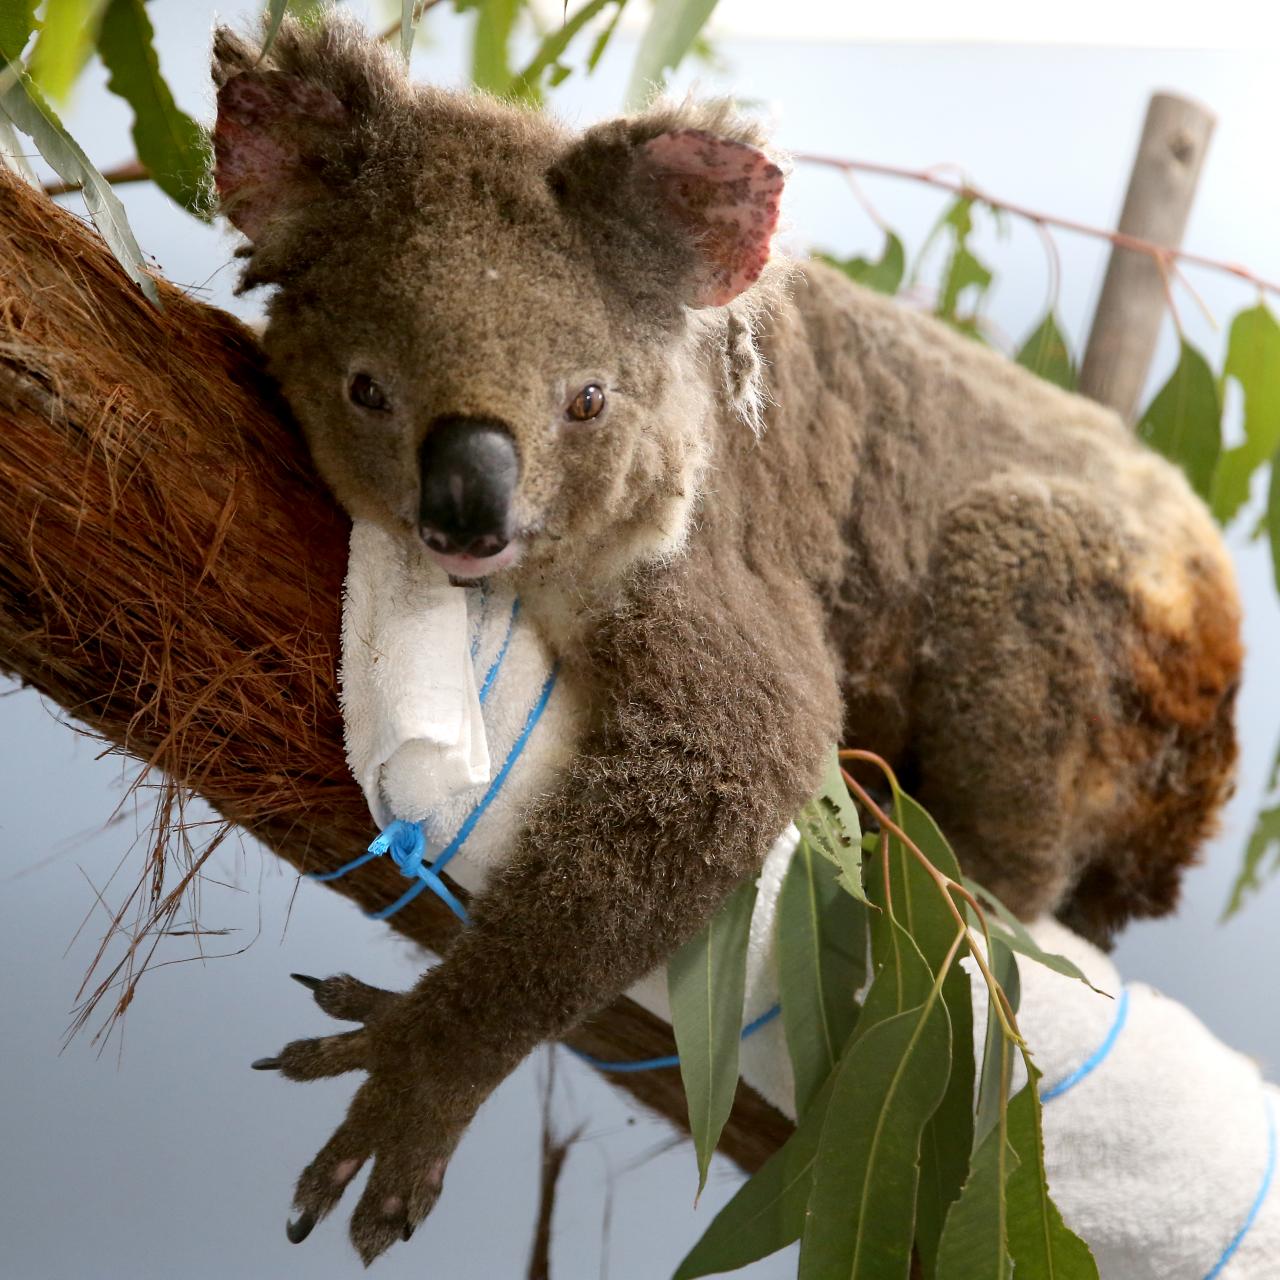 Please look at this sexy koala posing in front of the camera to